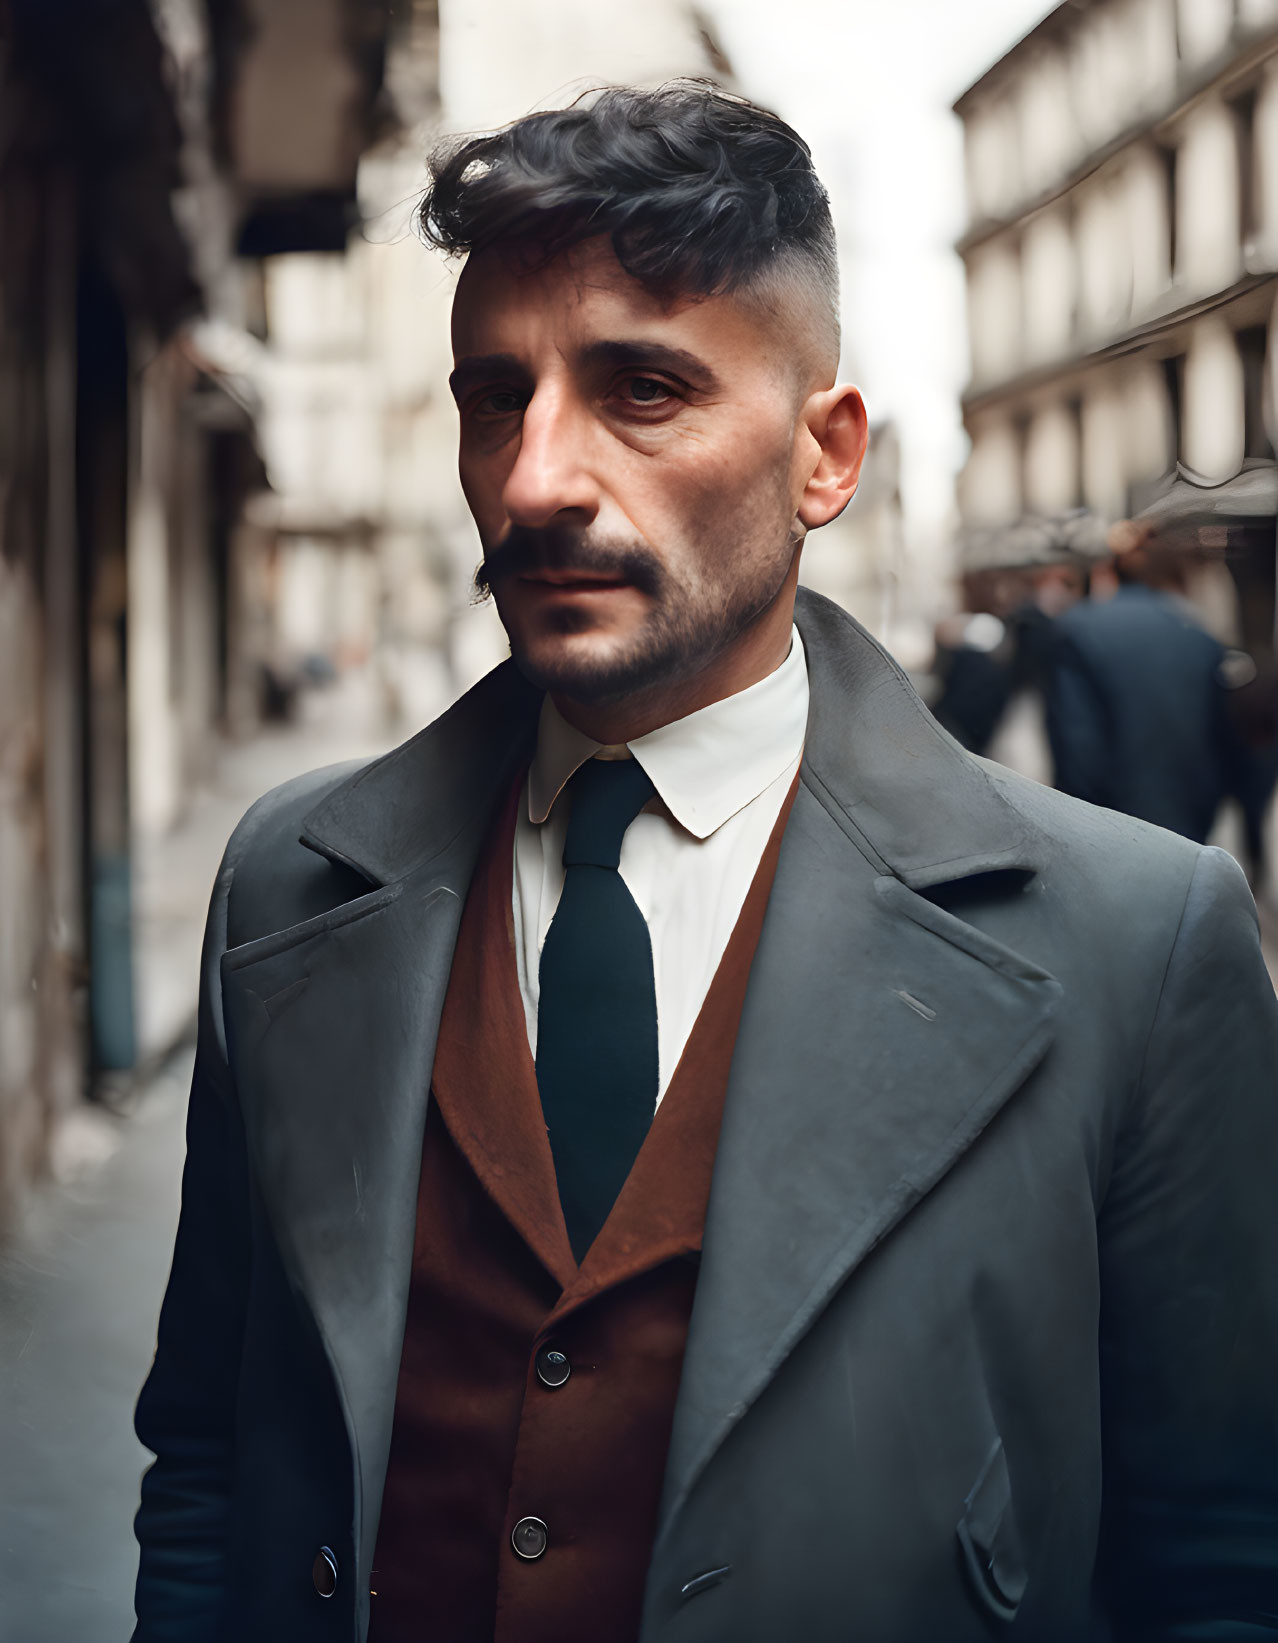 Stylish man with beard and mustache in coat on city street